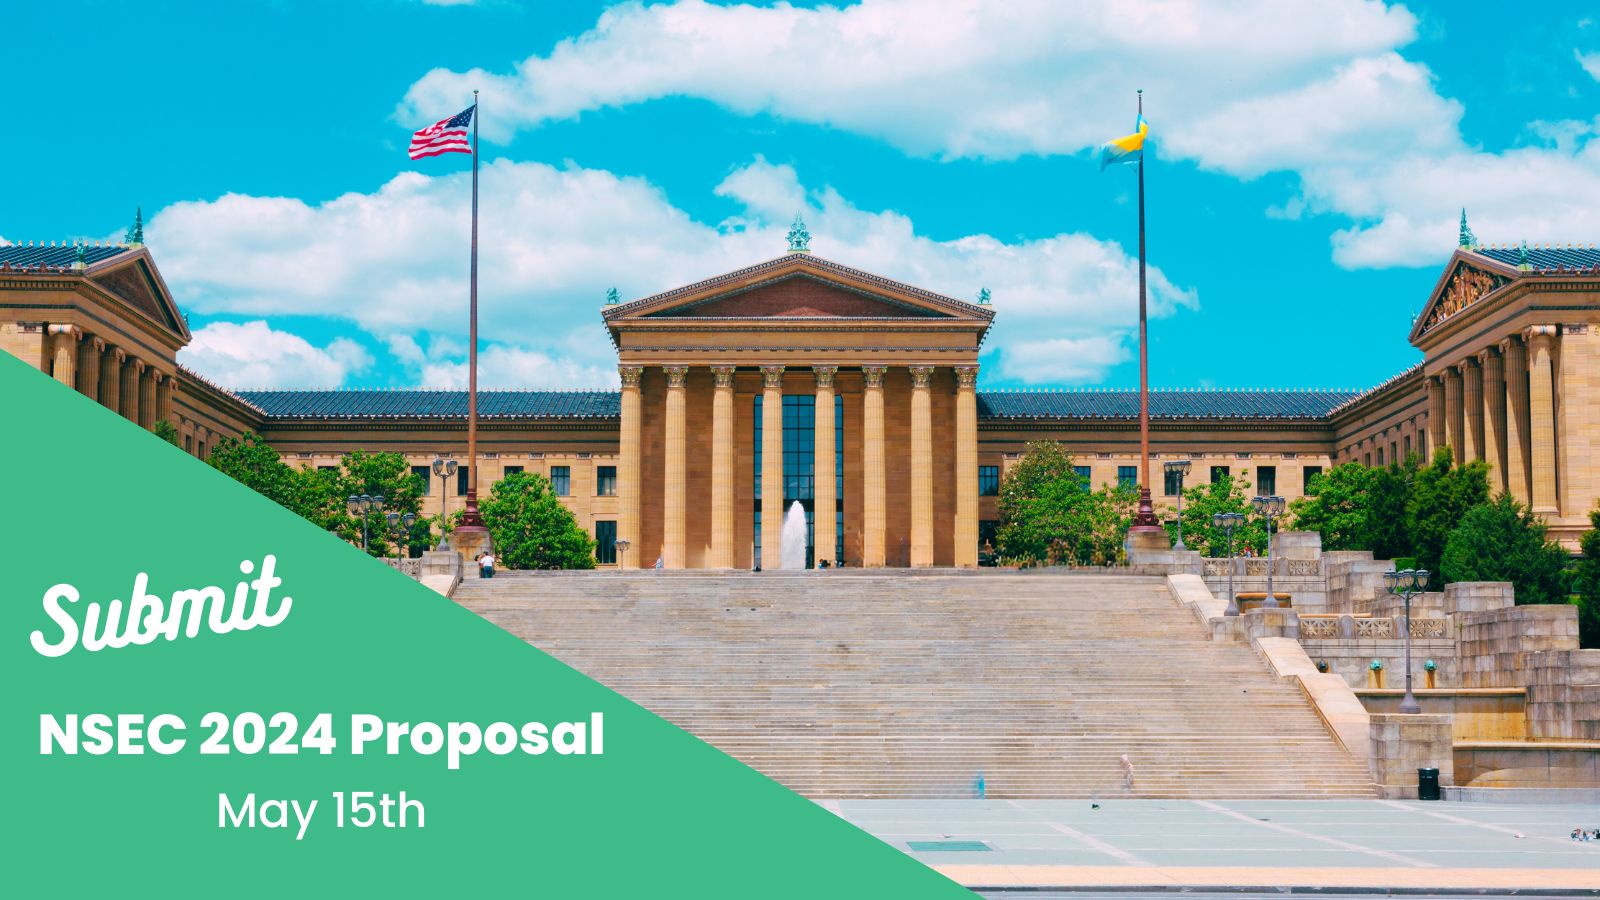 Image features the Philadelphia Art Museum. In the bottom left corner of the image is the text "Submit NSEC 2025 Proposal. May 15th"